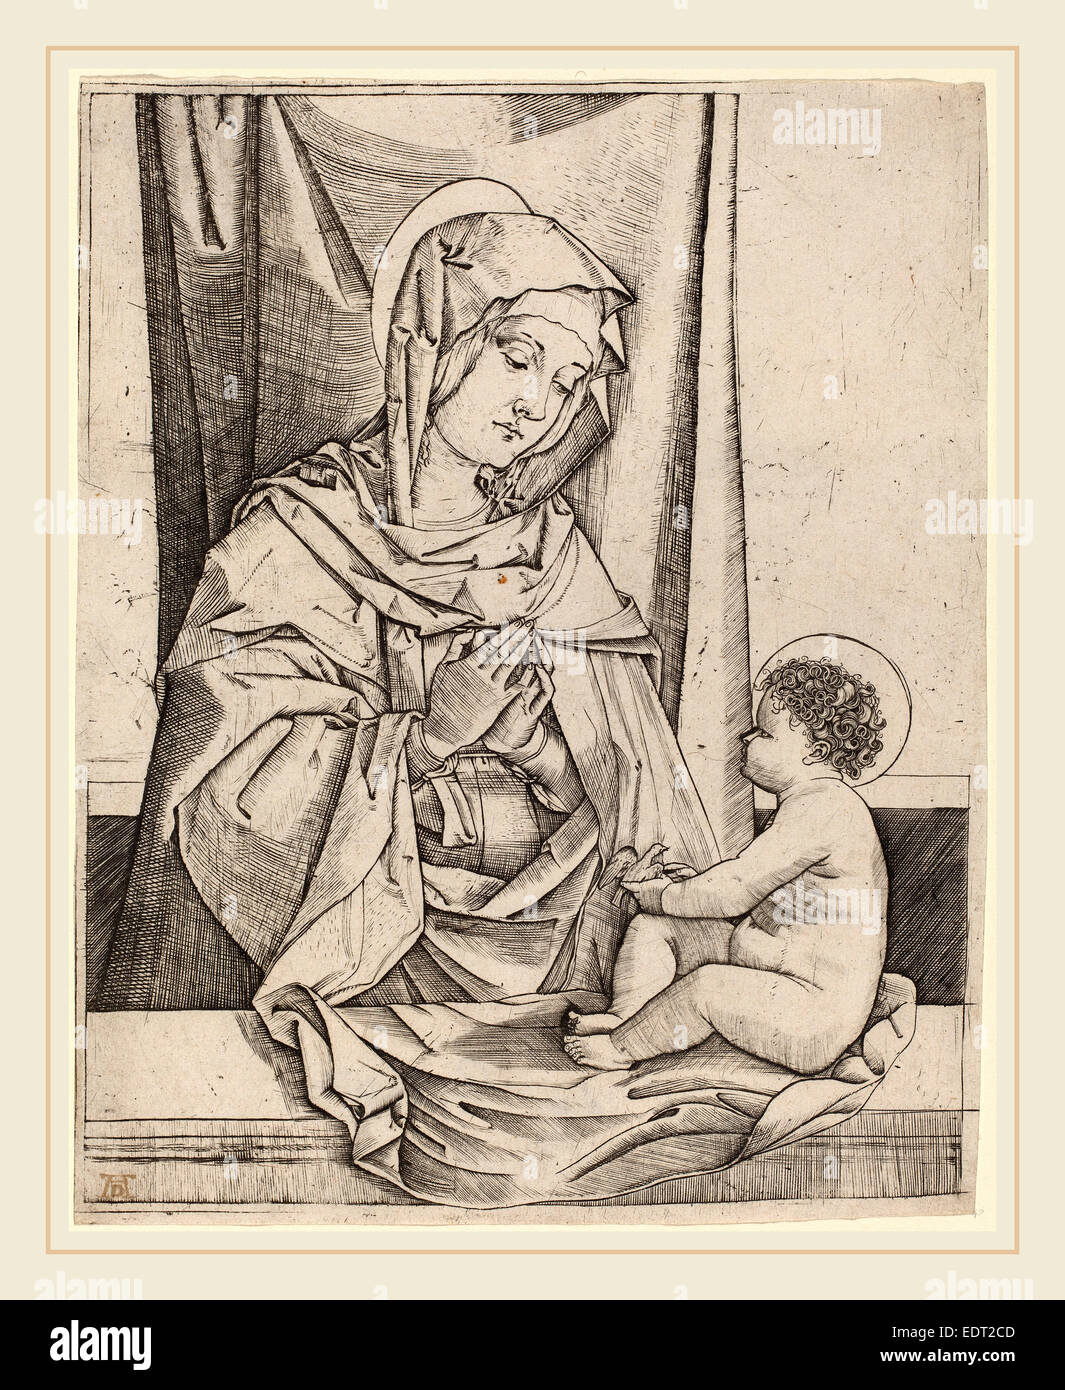 Benedetto Montagna (Italian, c. 1480-1555 or 1558), The Virgin and Child, c. 1502, engraving Stock Photo